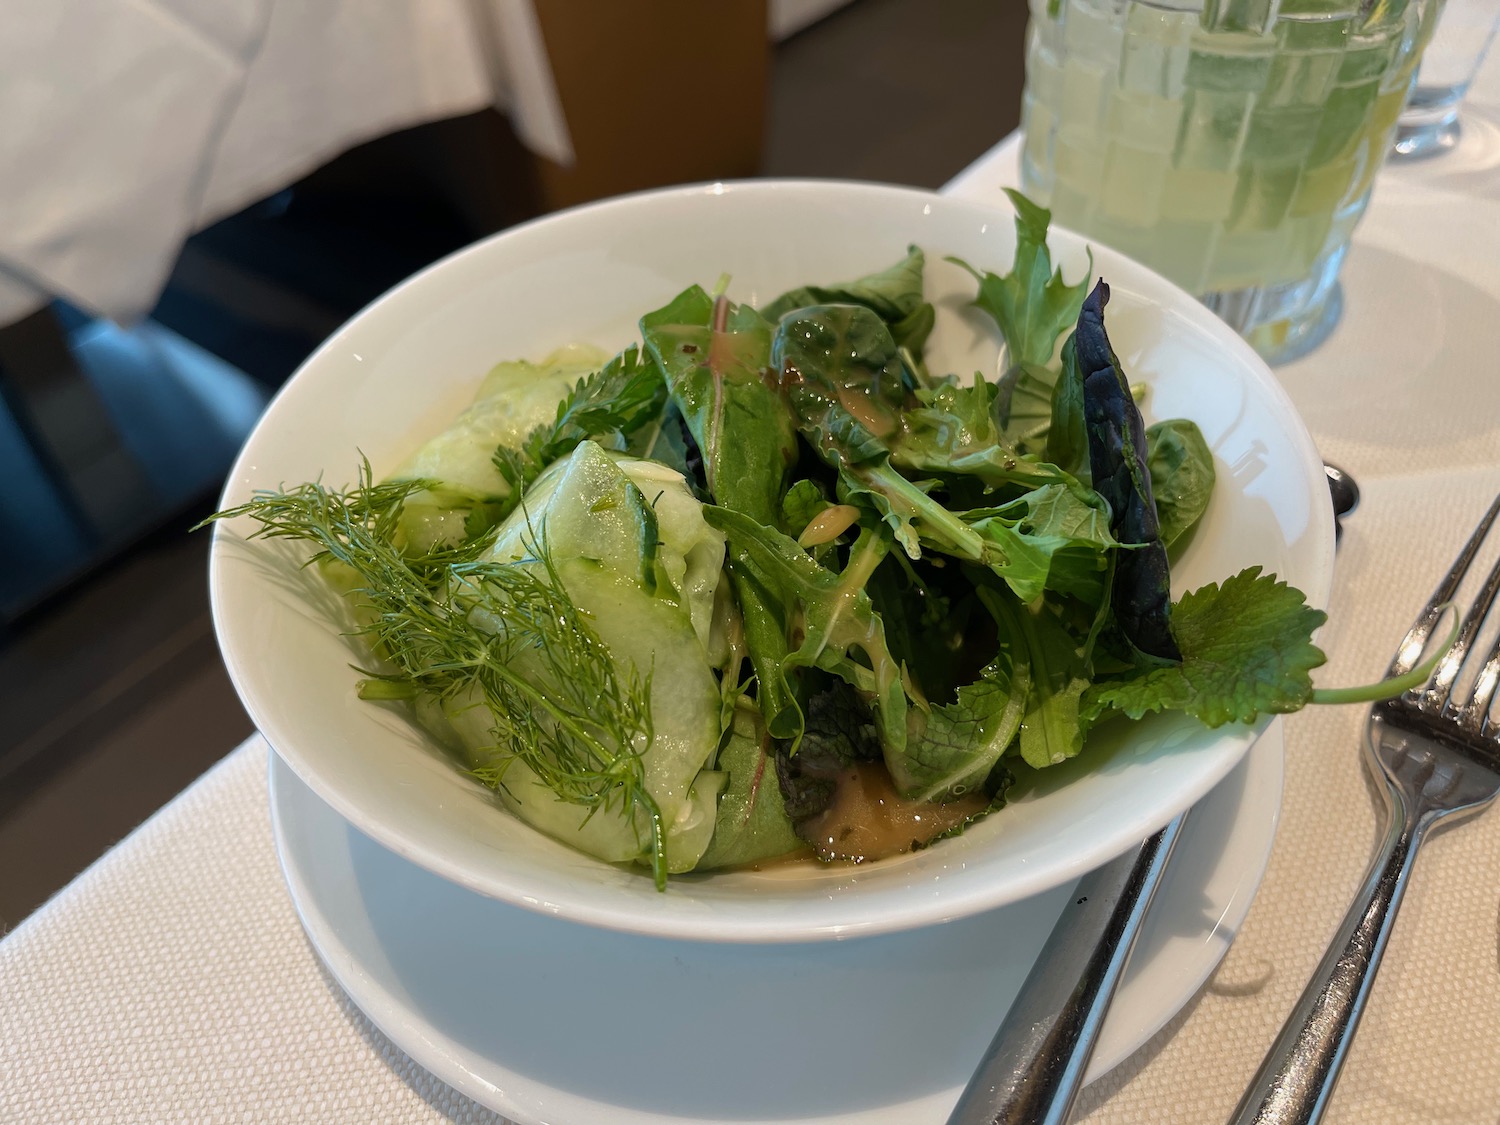 a bowl of salad with greens and a glass of water